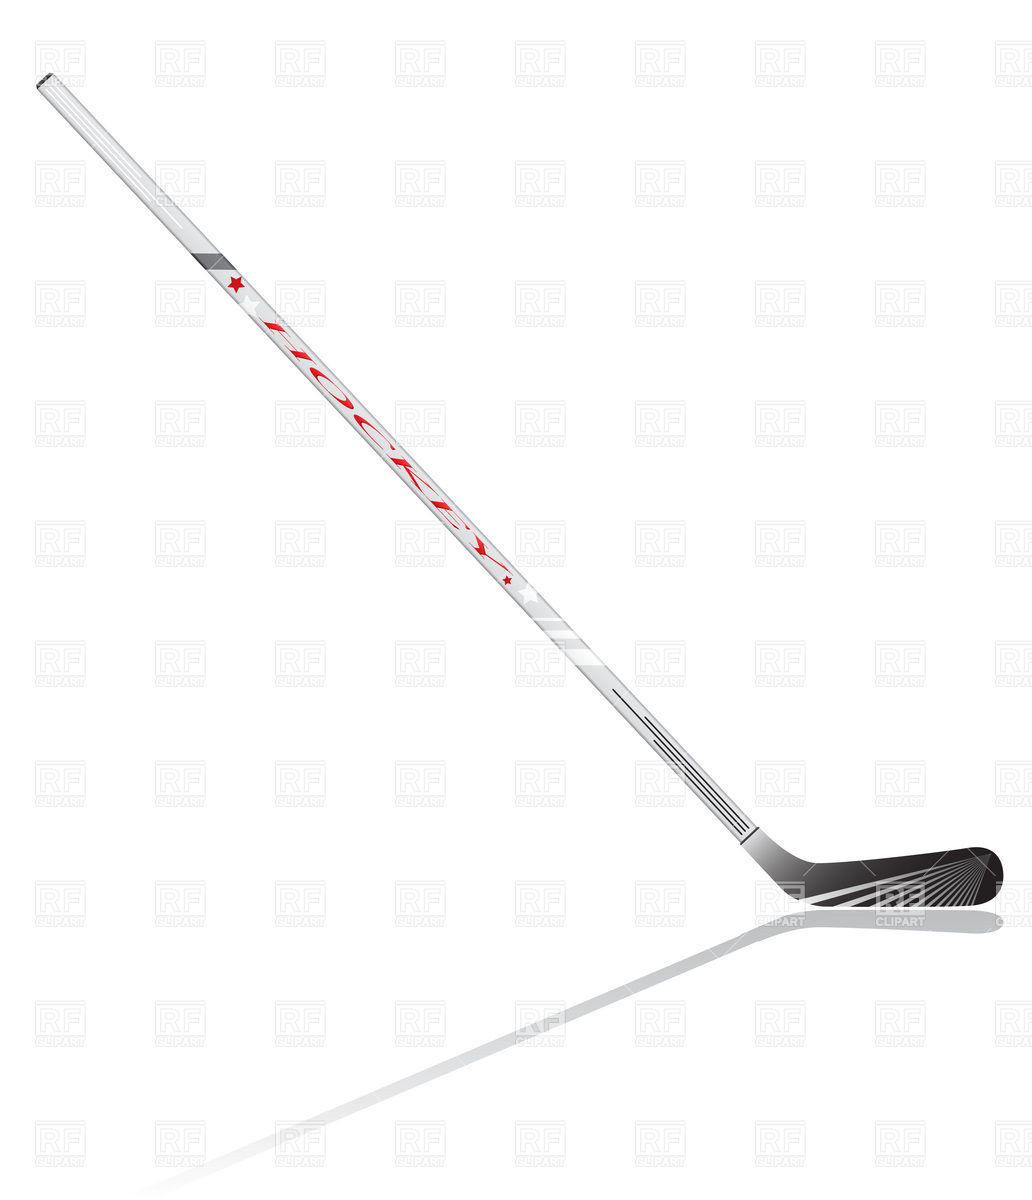 Ice Hockey Stick Download Royalty Free Vector Clipart  Eps